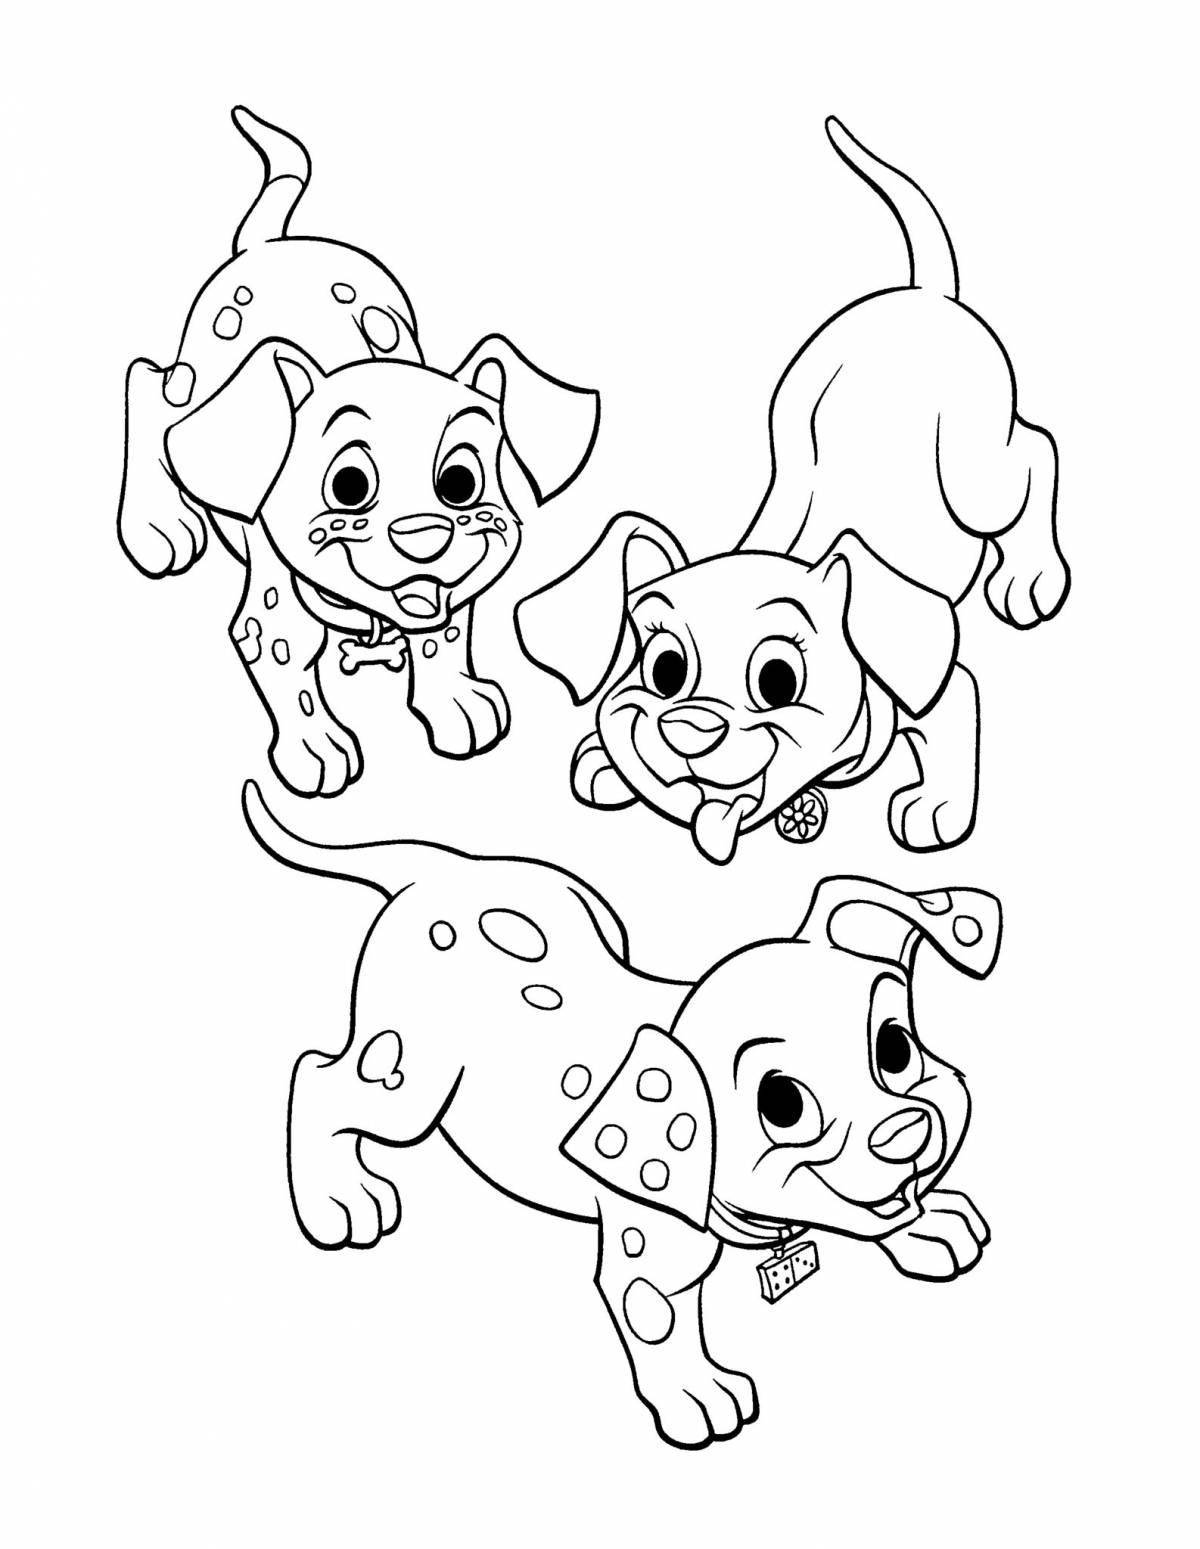 Cute cats and dogs coloring page